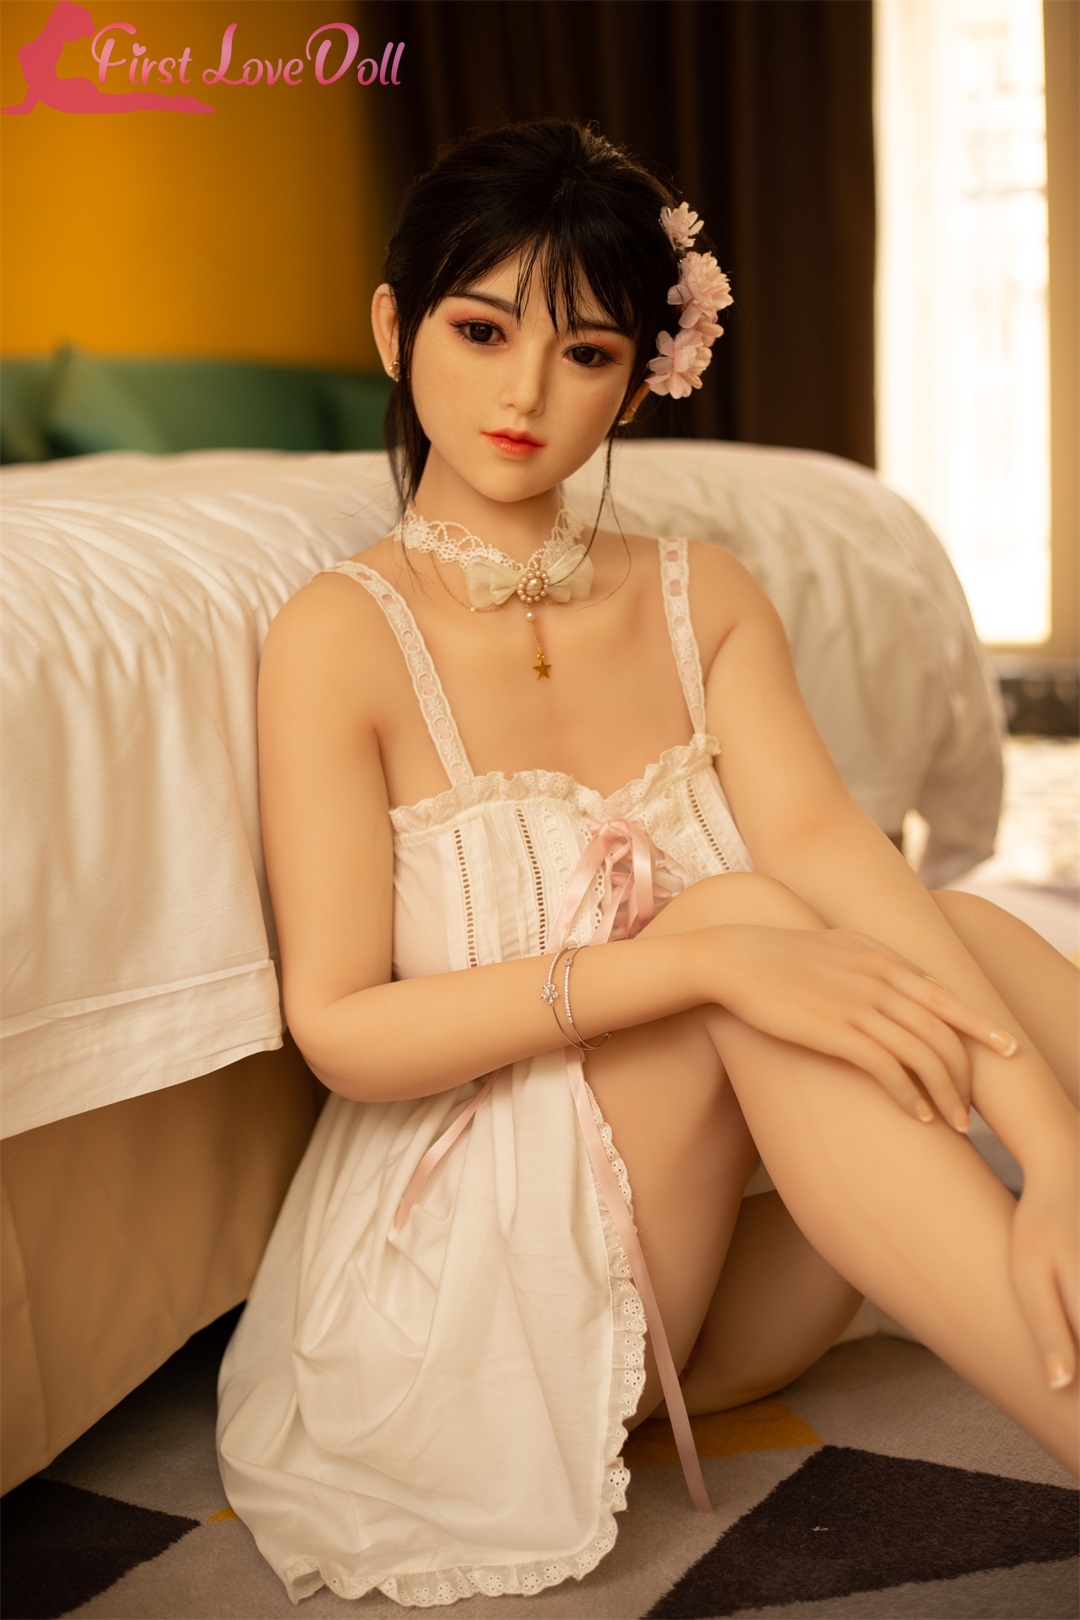 JX Doll | Maki- 4ft 11/150cm Japanese Style Ultra Realistic Silicone Sex Doll-First Love Doll